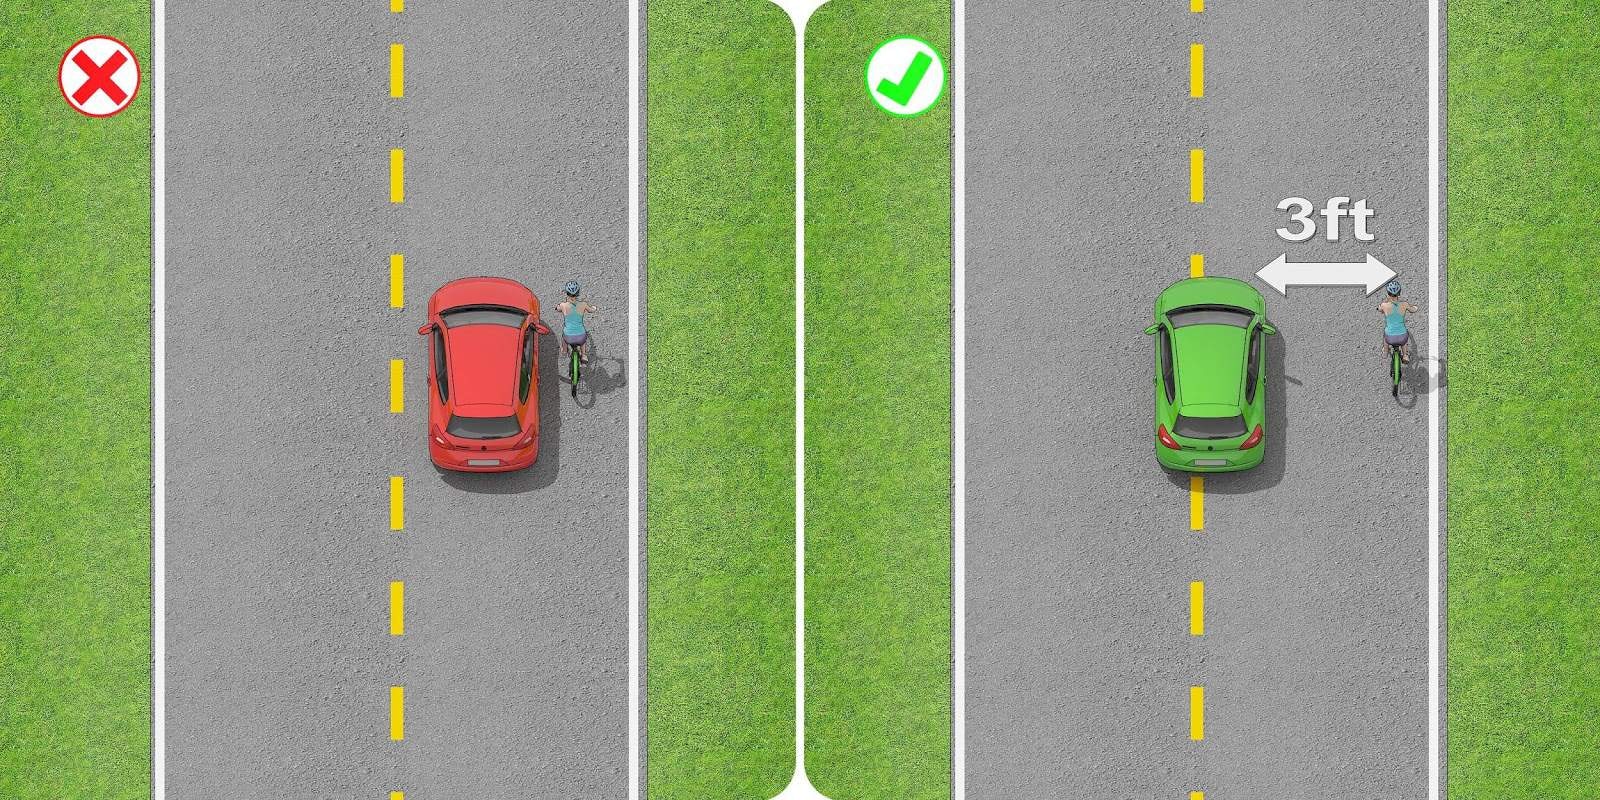 Illustrating the distance necessary when passing a cyclist